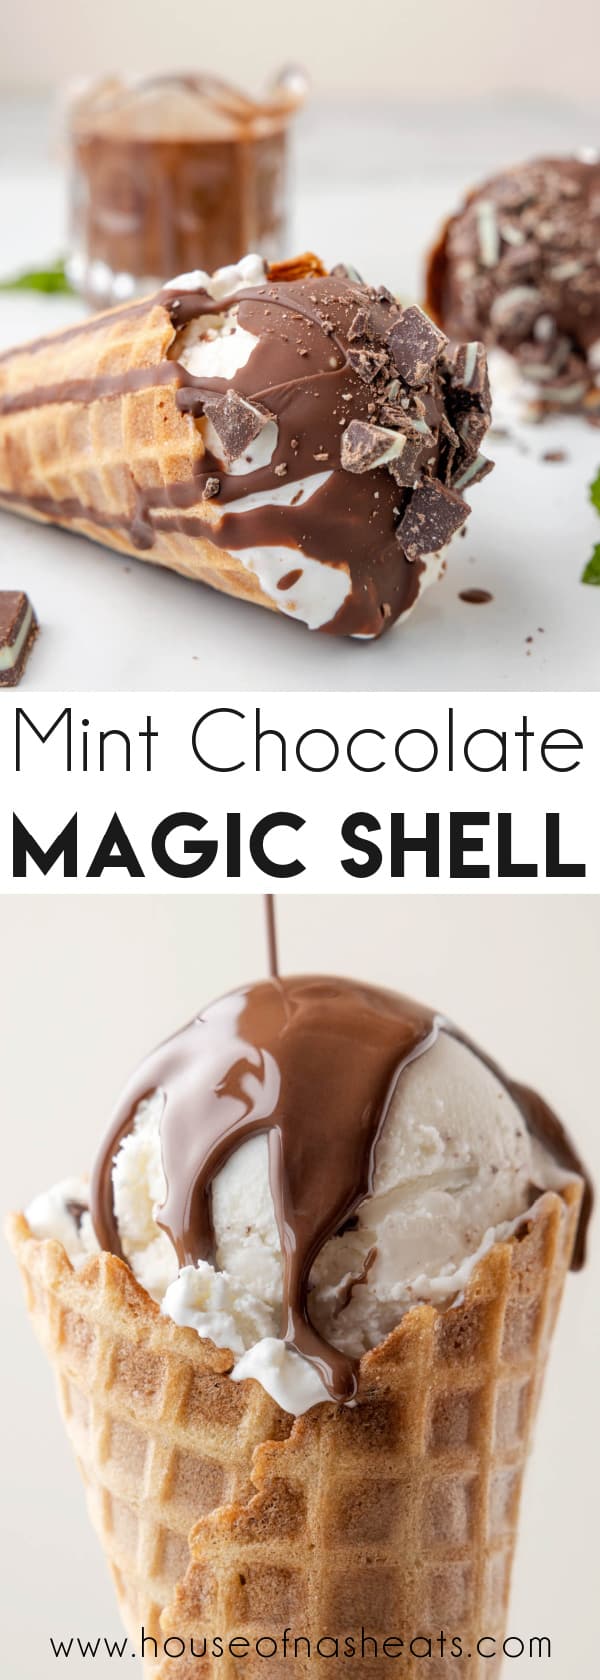 A collage of images of mint chocolate magic shell on ice cream cones with text overlay.